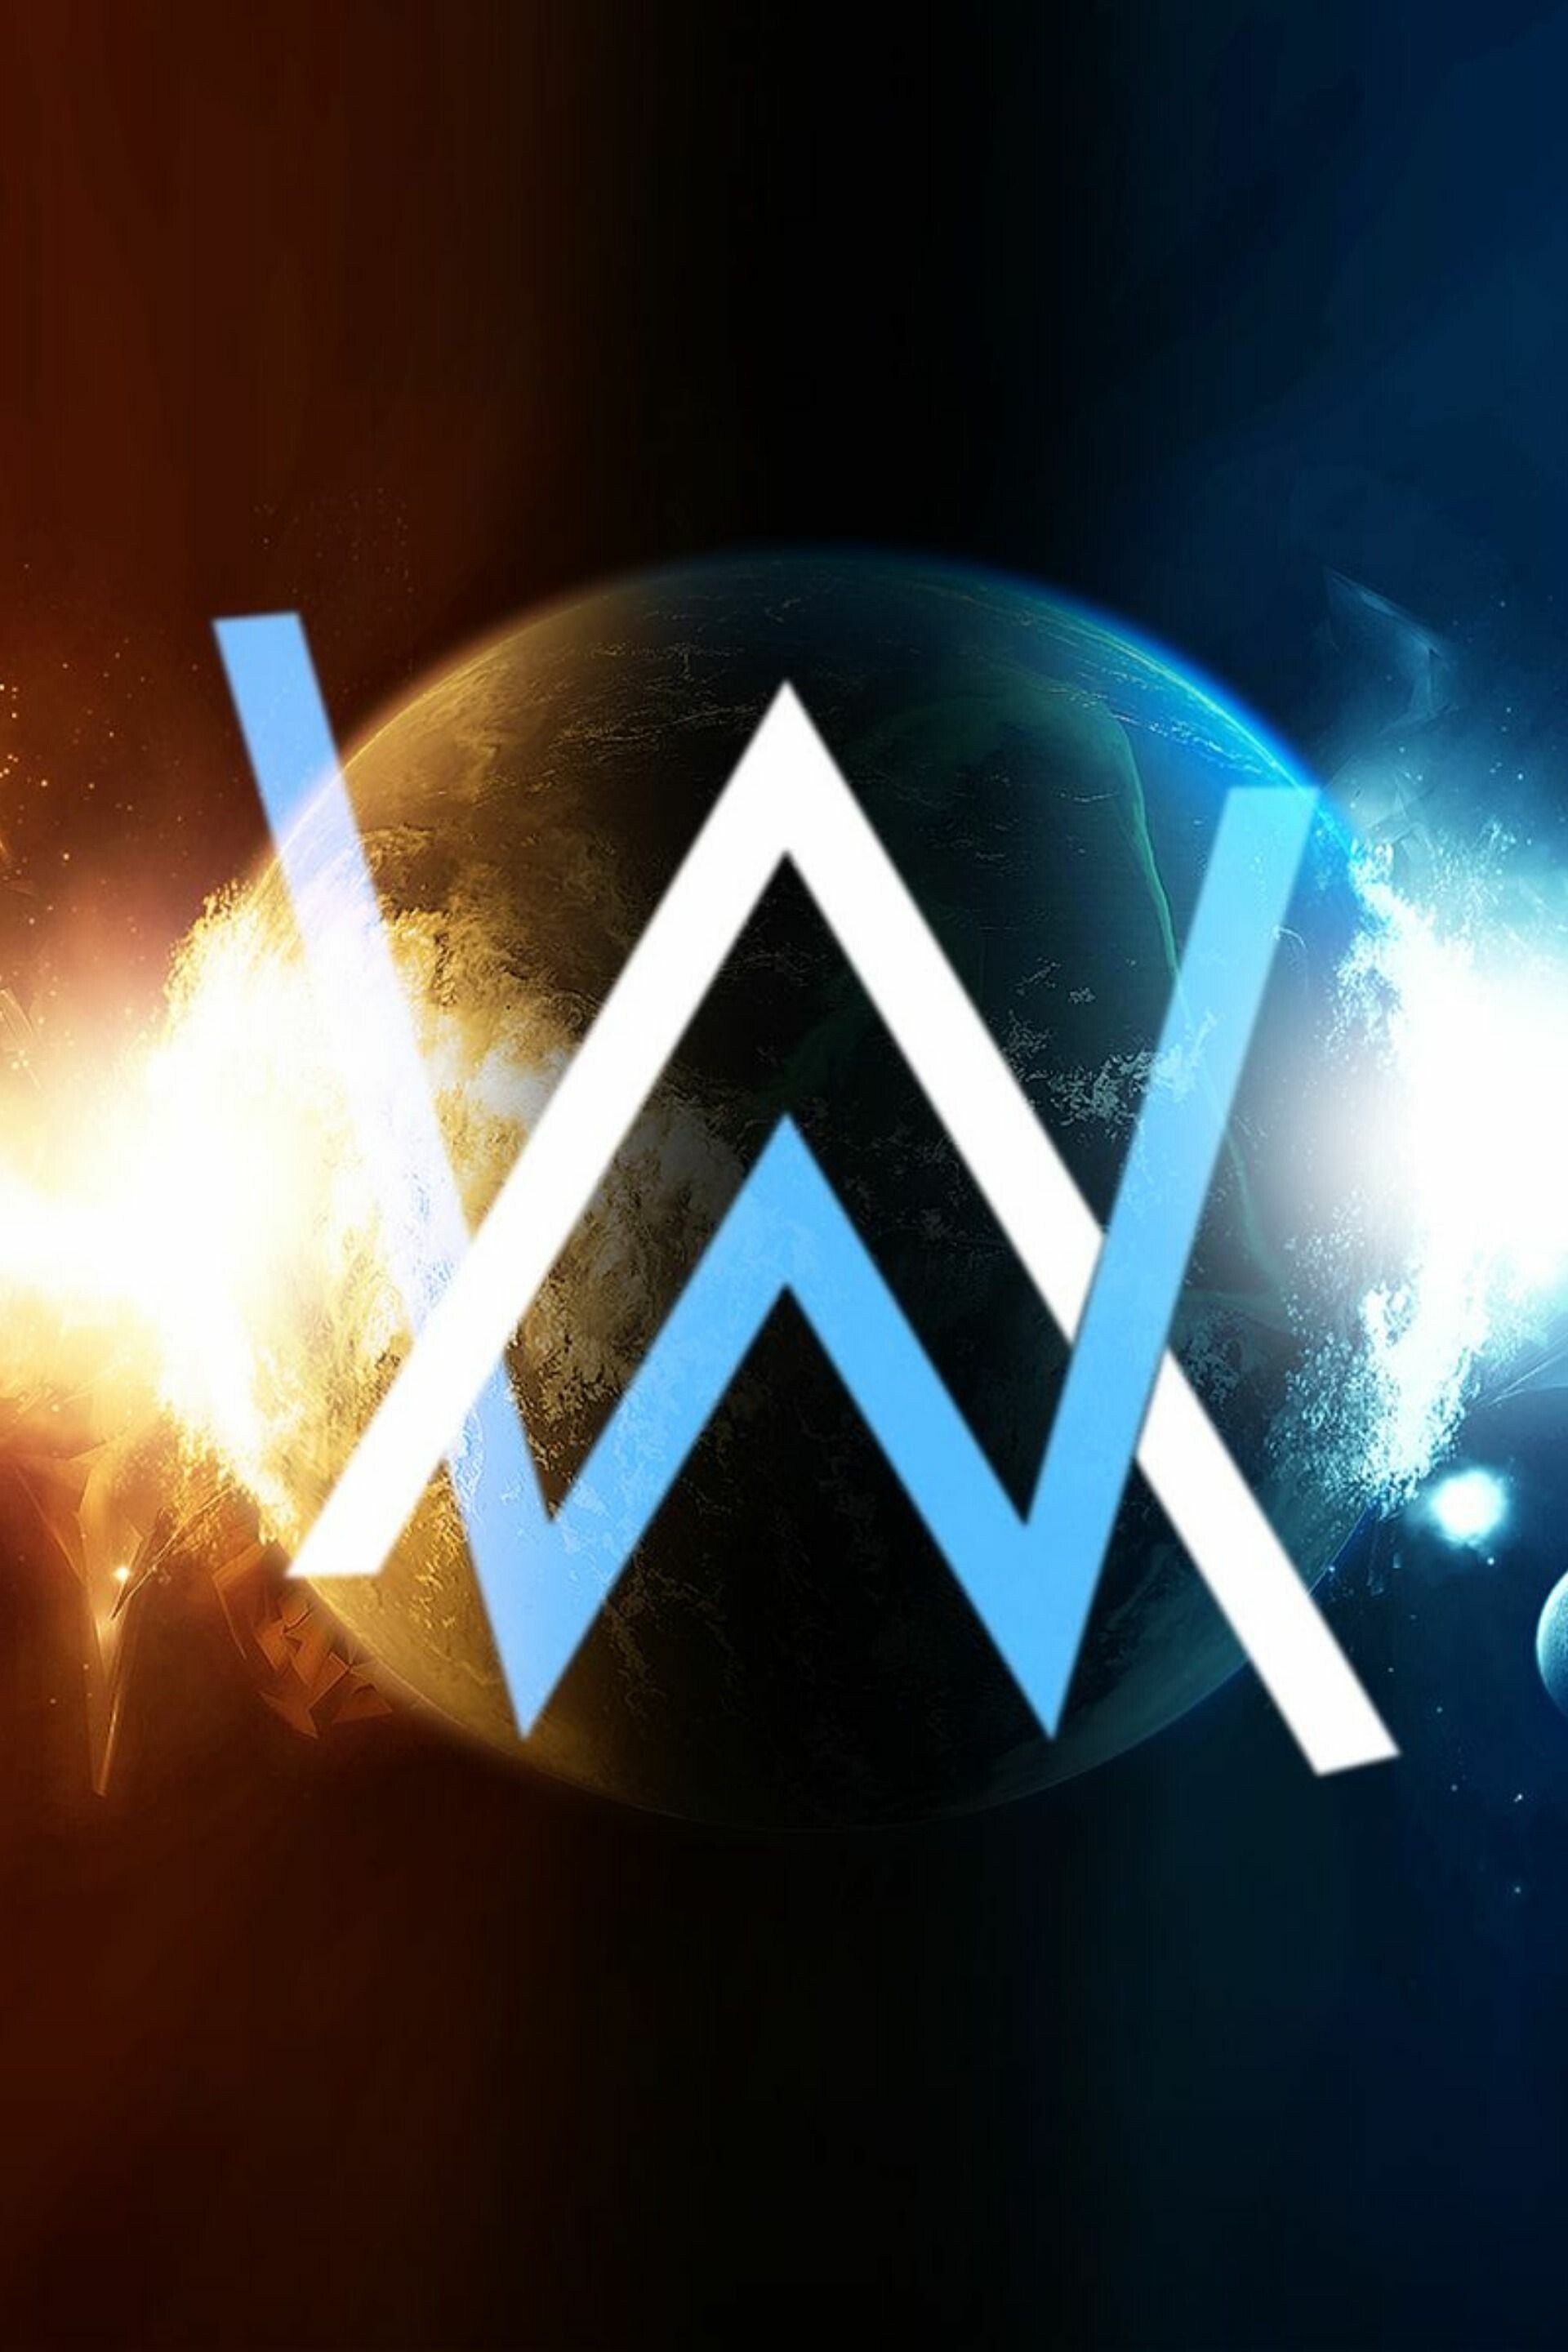 Alan Walker: DJ, Known for “Faded”, A massive Europe-wide hit. 1920x2880 HD Background.